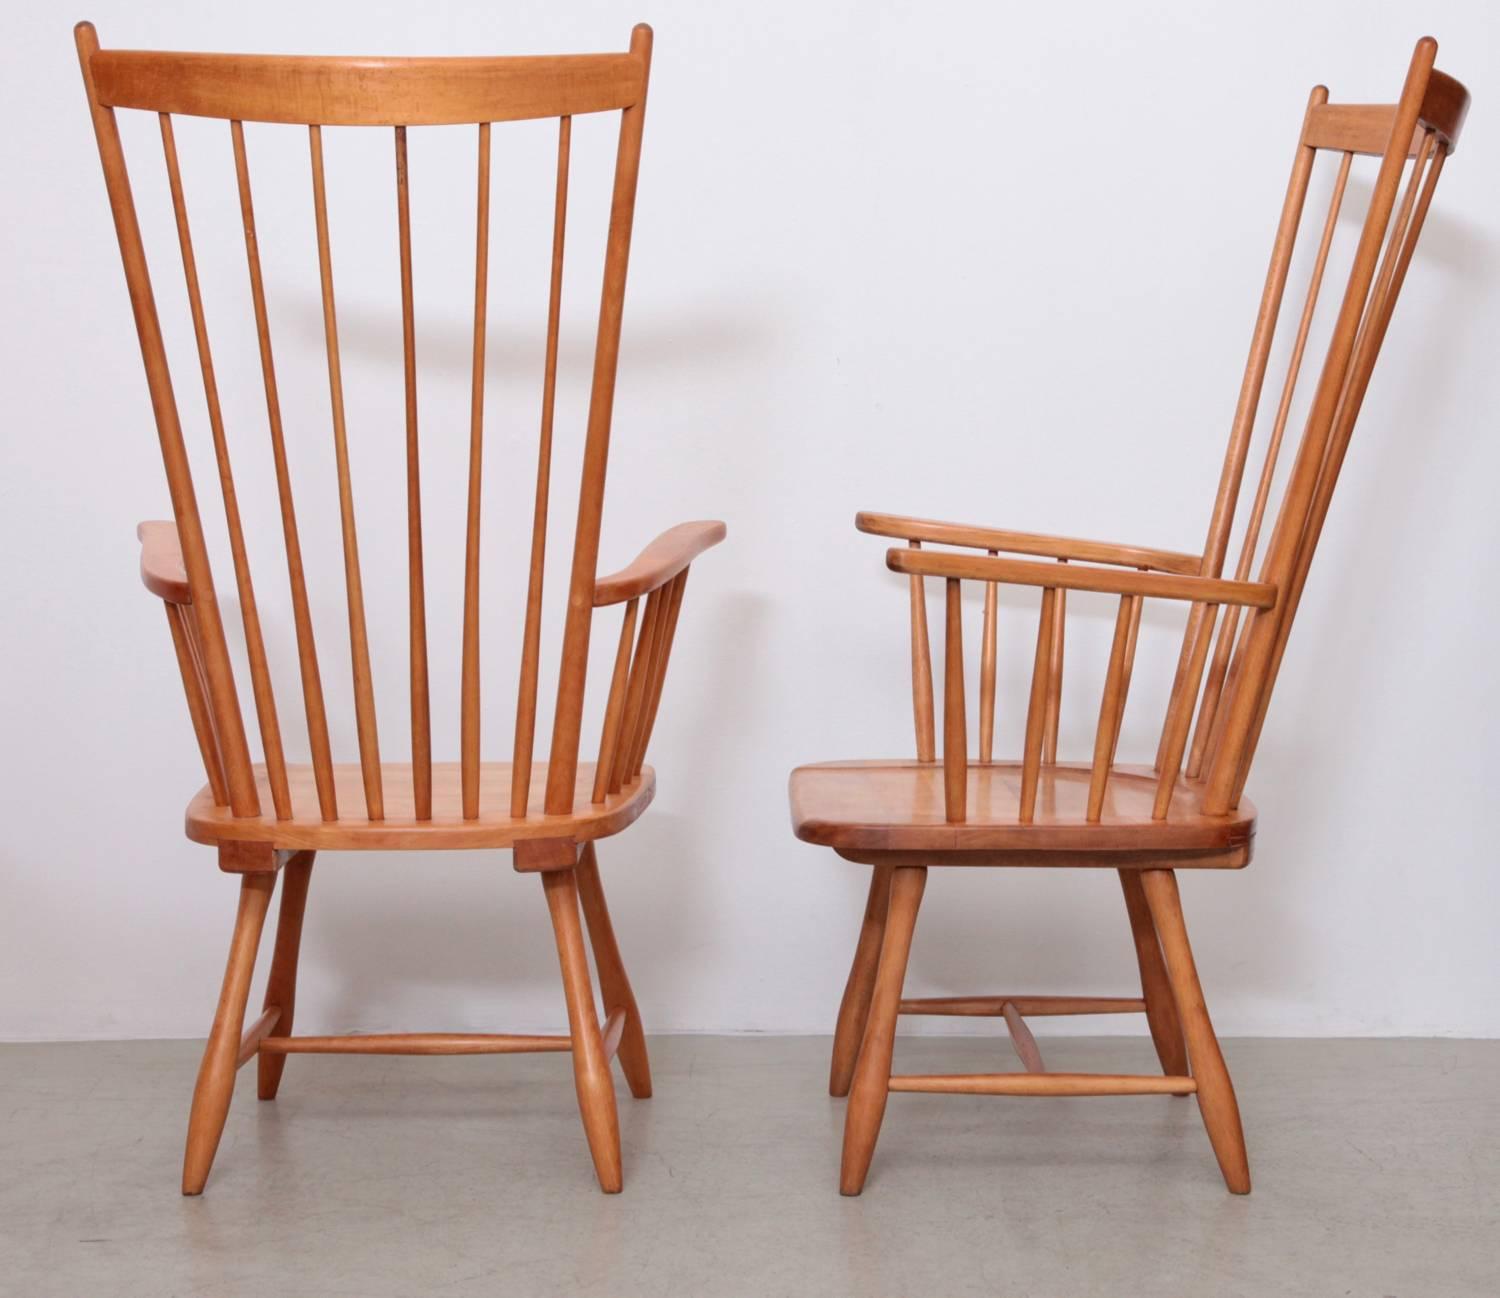 Carved Pair of Low Arno Lambrecht Highback Windsor Lounge Chairs